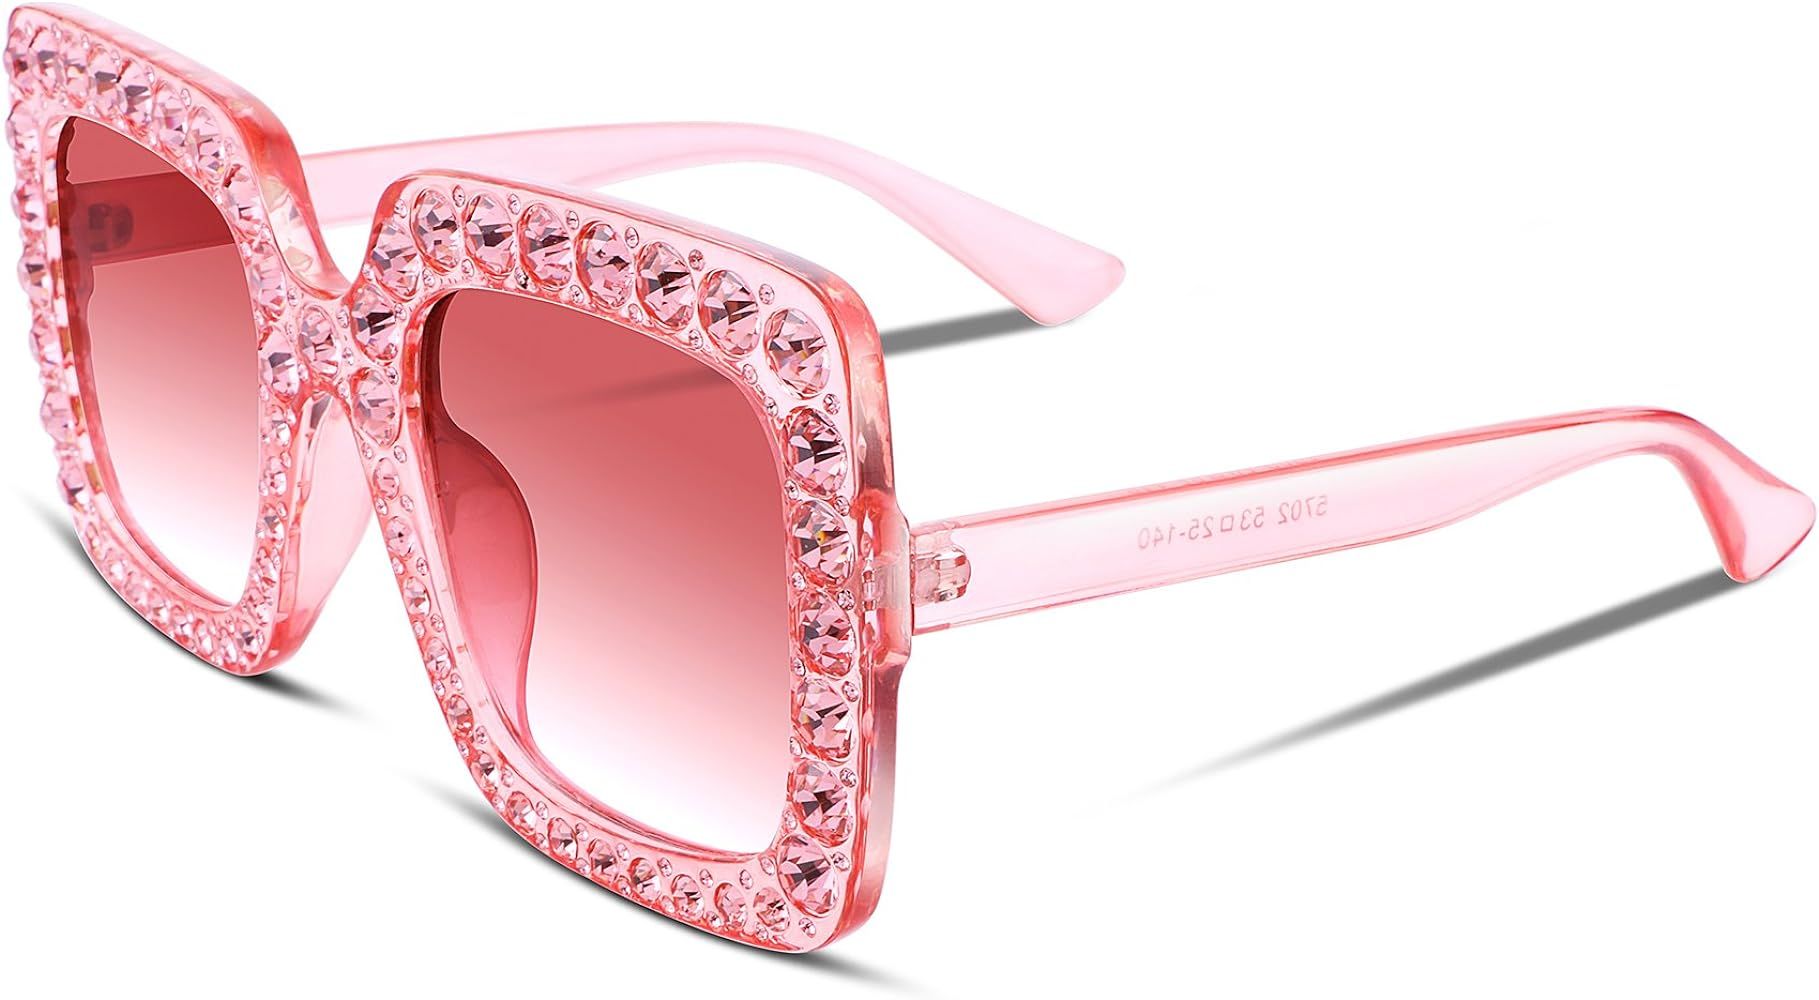 FEISEDY Women Sparkling Crystal Sunglasses Oversized Square Thick Frame B2283 | Amazon (US)